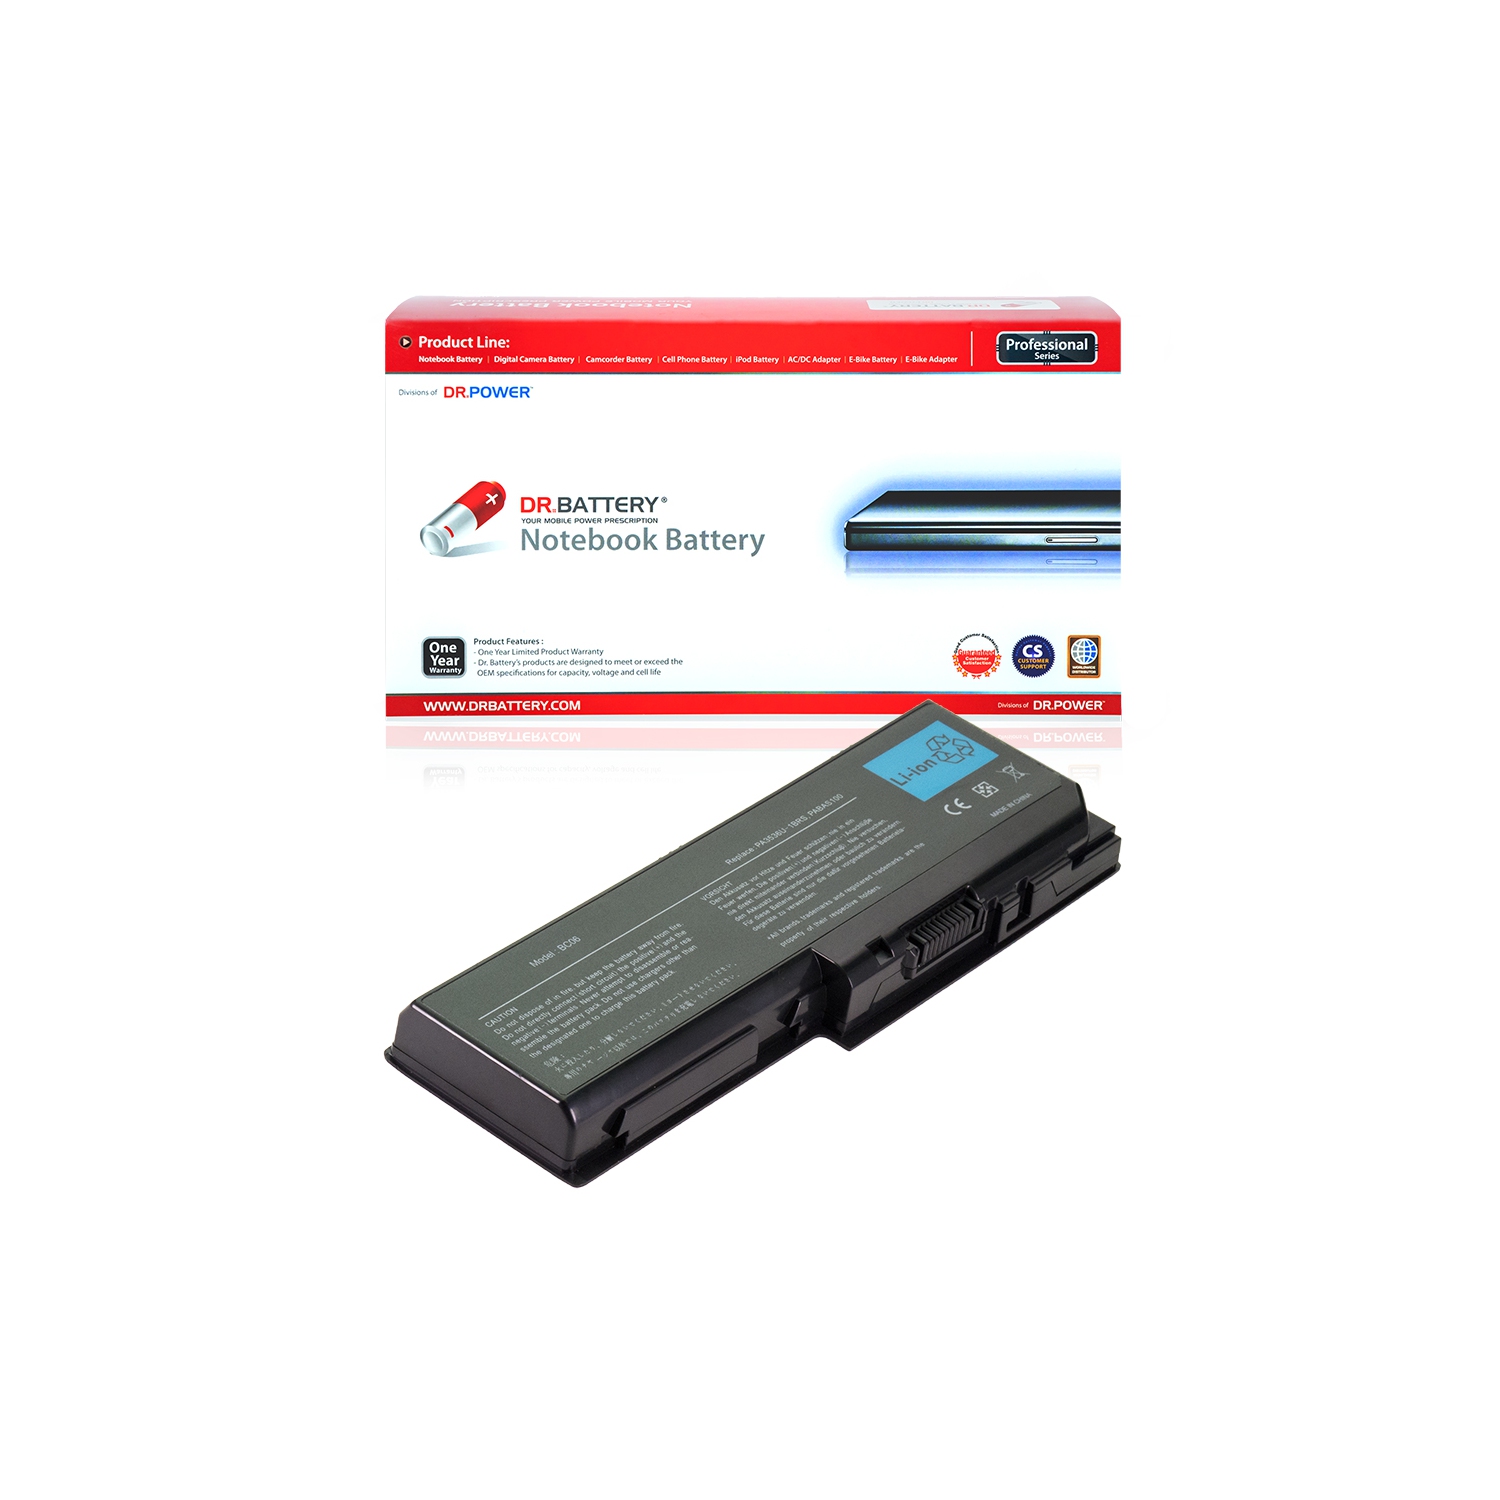 DR. BATTERY Replacement for Toshiba Satellite P205 P205D P300 P300D PA3536U-1BAS PA3536U-1BRS PA3537U-1BAS [10.8V / 48Wh] **Free Shipping**